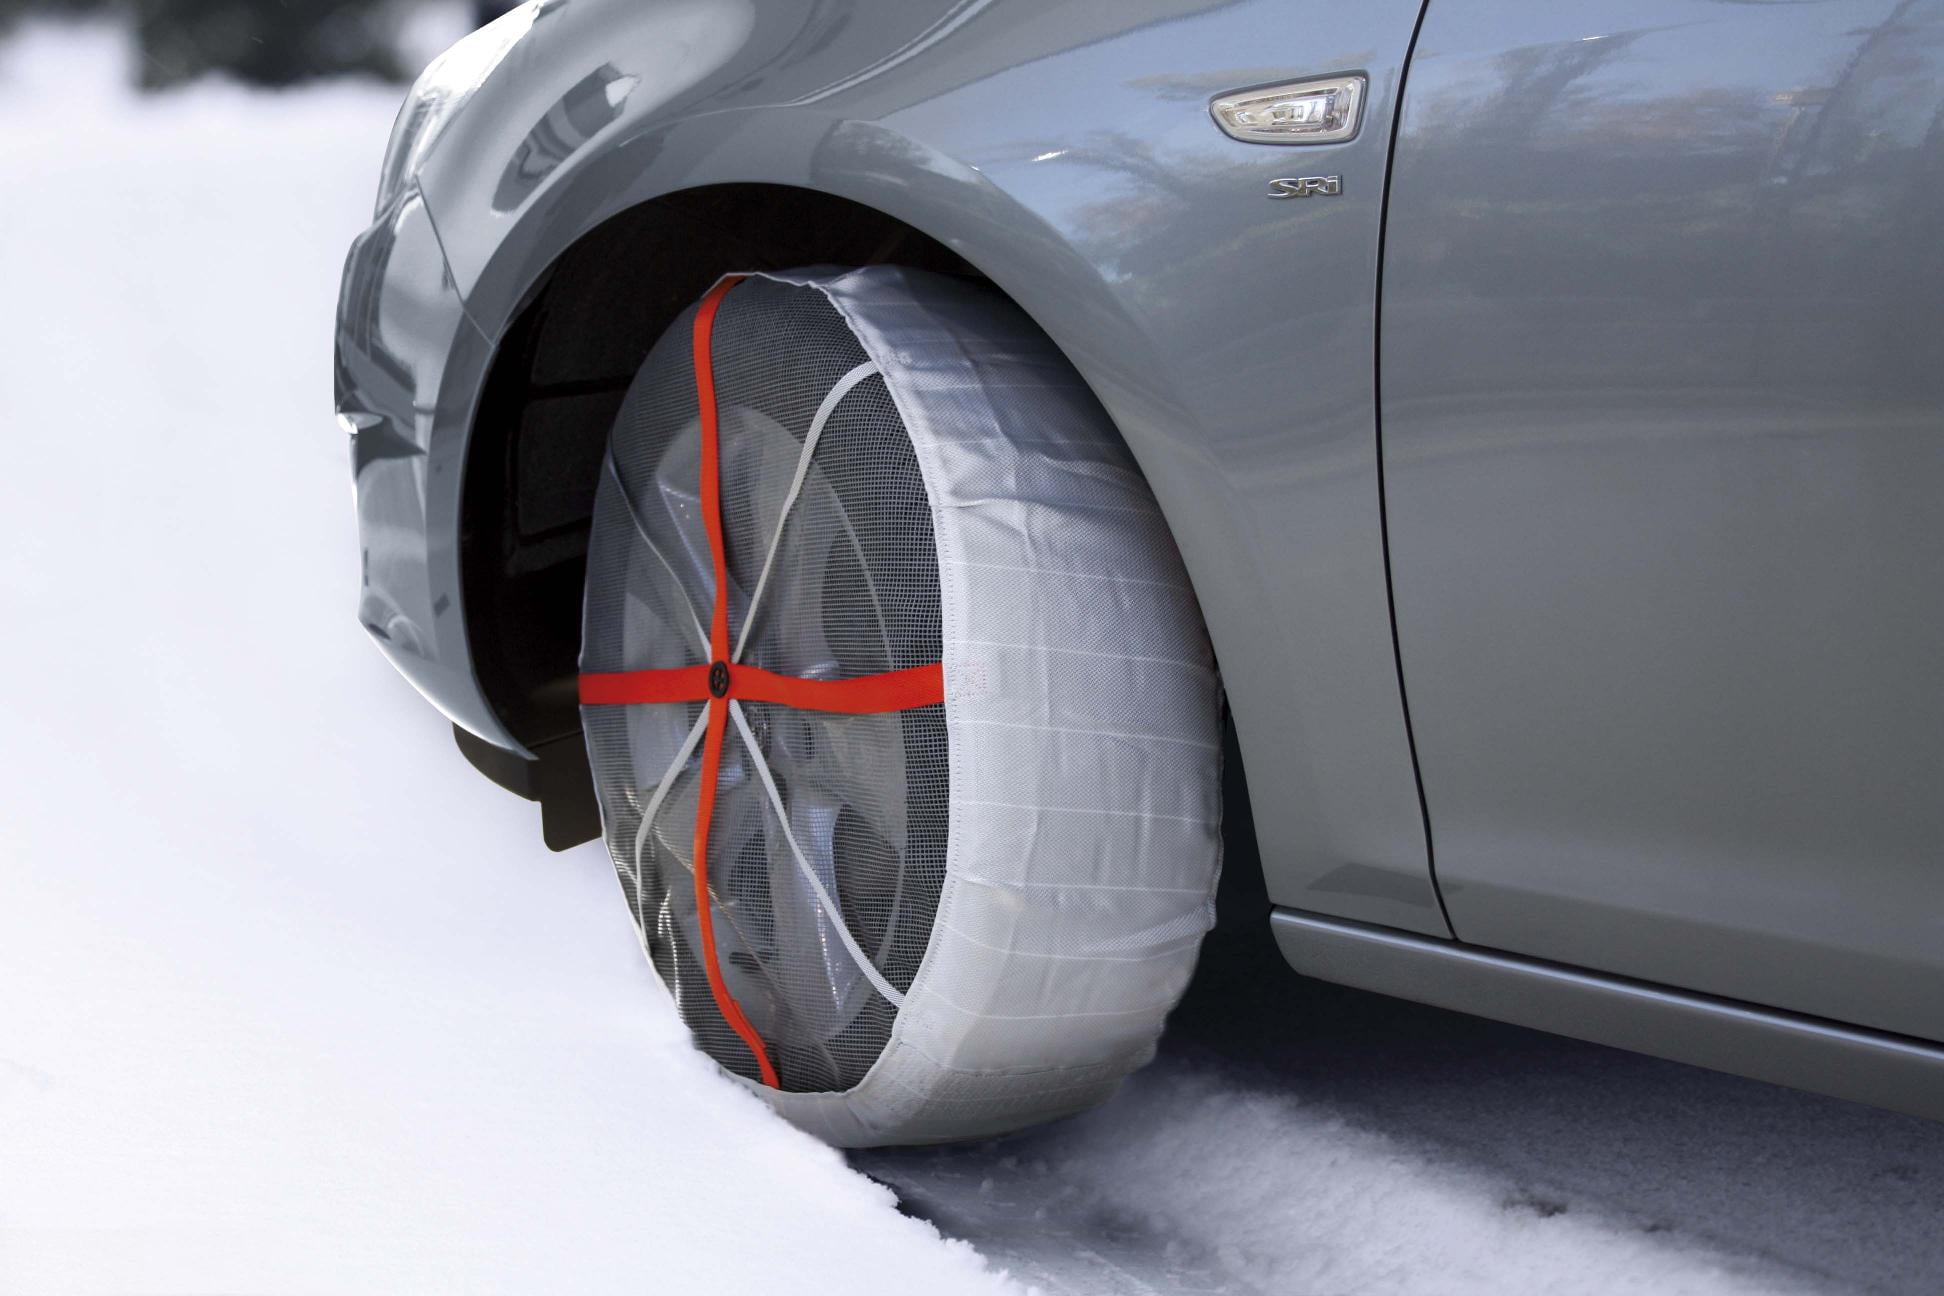 AutoSock Snow Socks 645 Traction Wheel Covers for Snow and Ice. -  Walmart.com